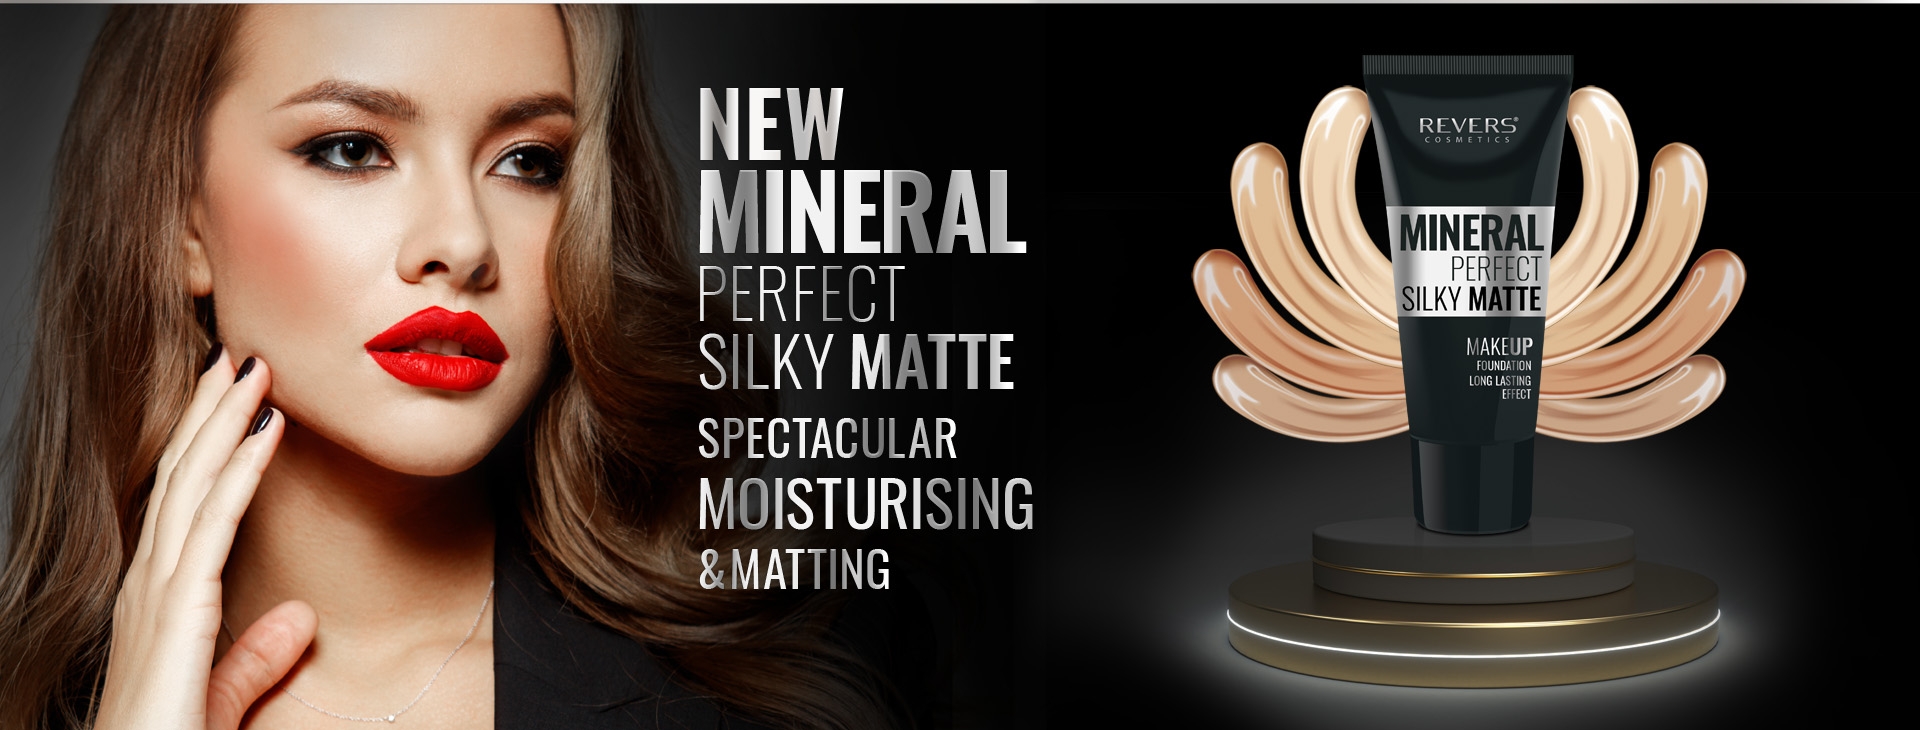 MINERL PERFECT SILKY MATTE